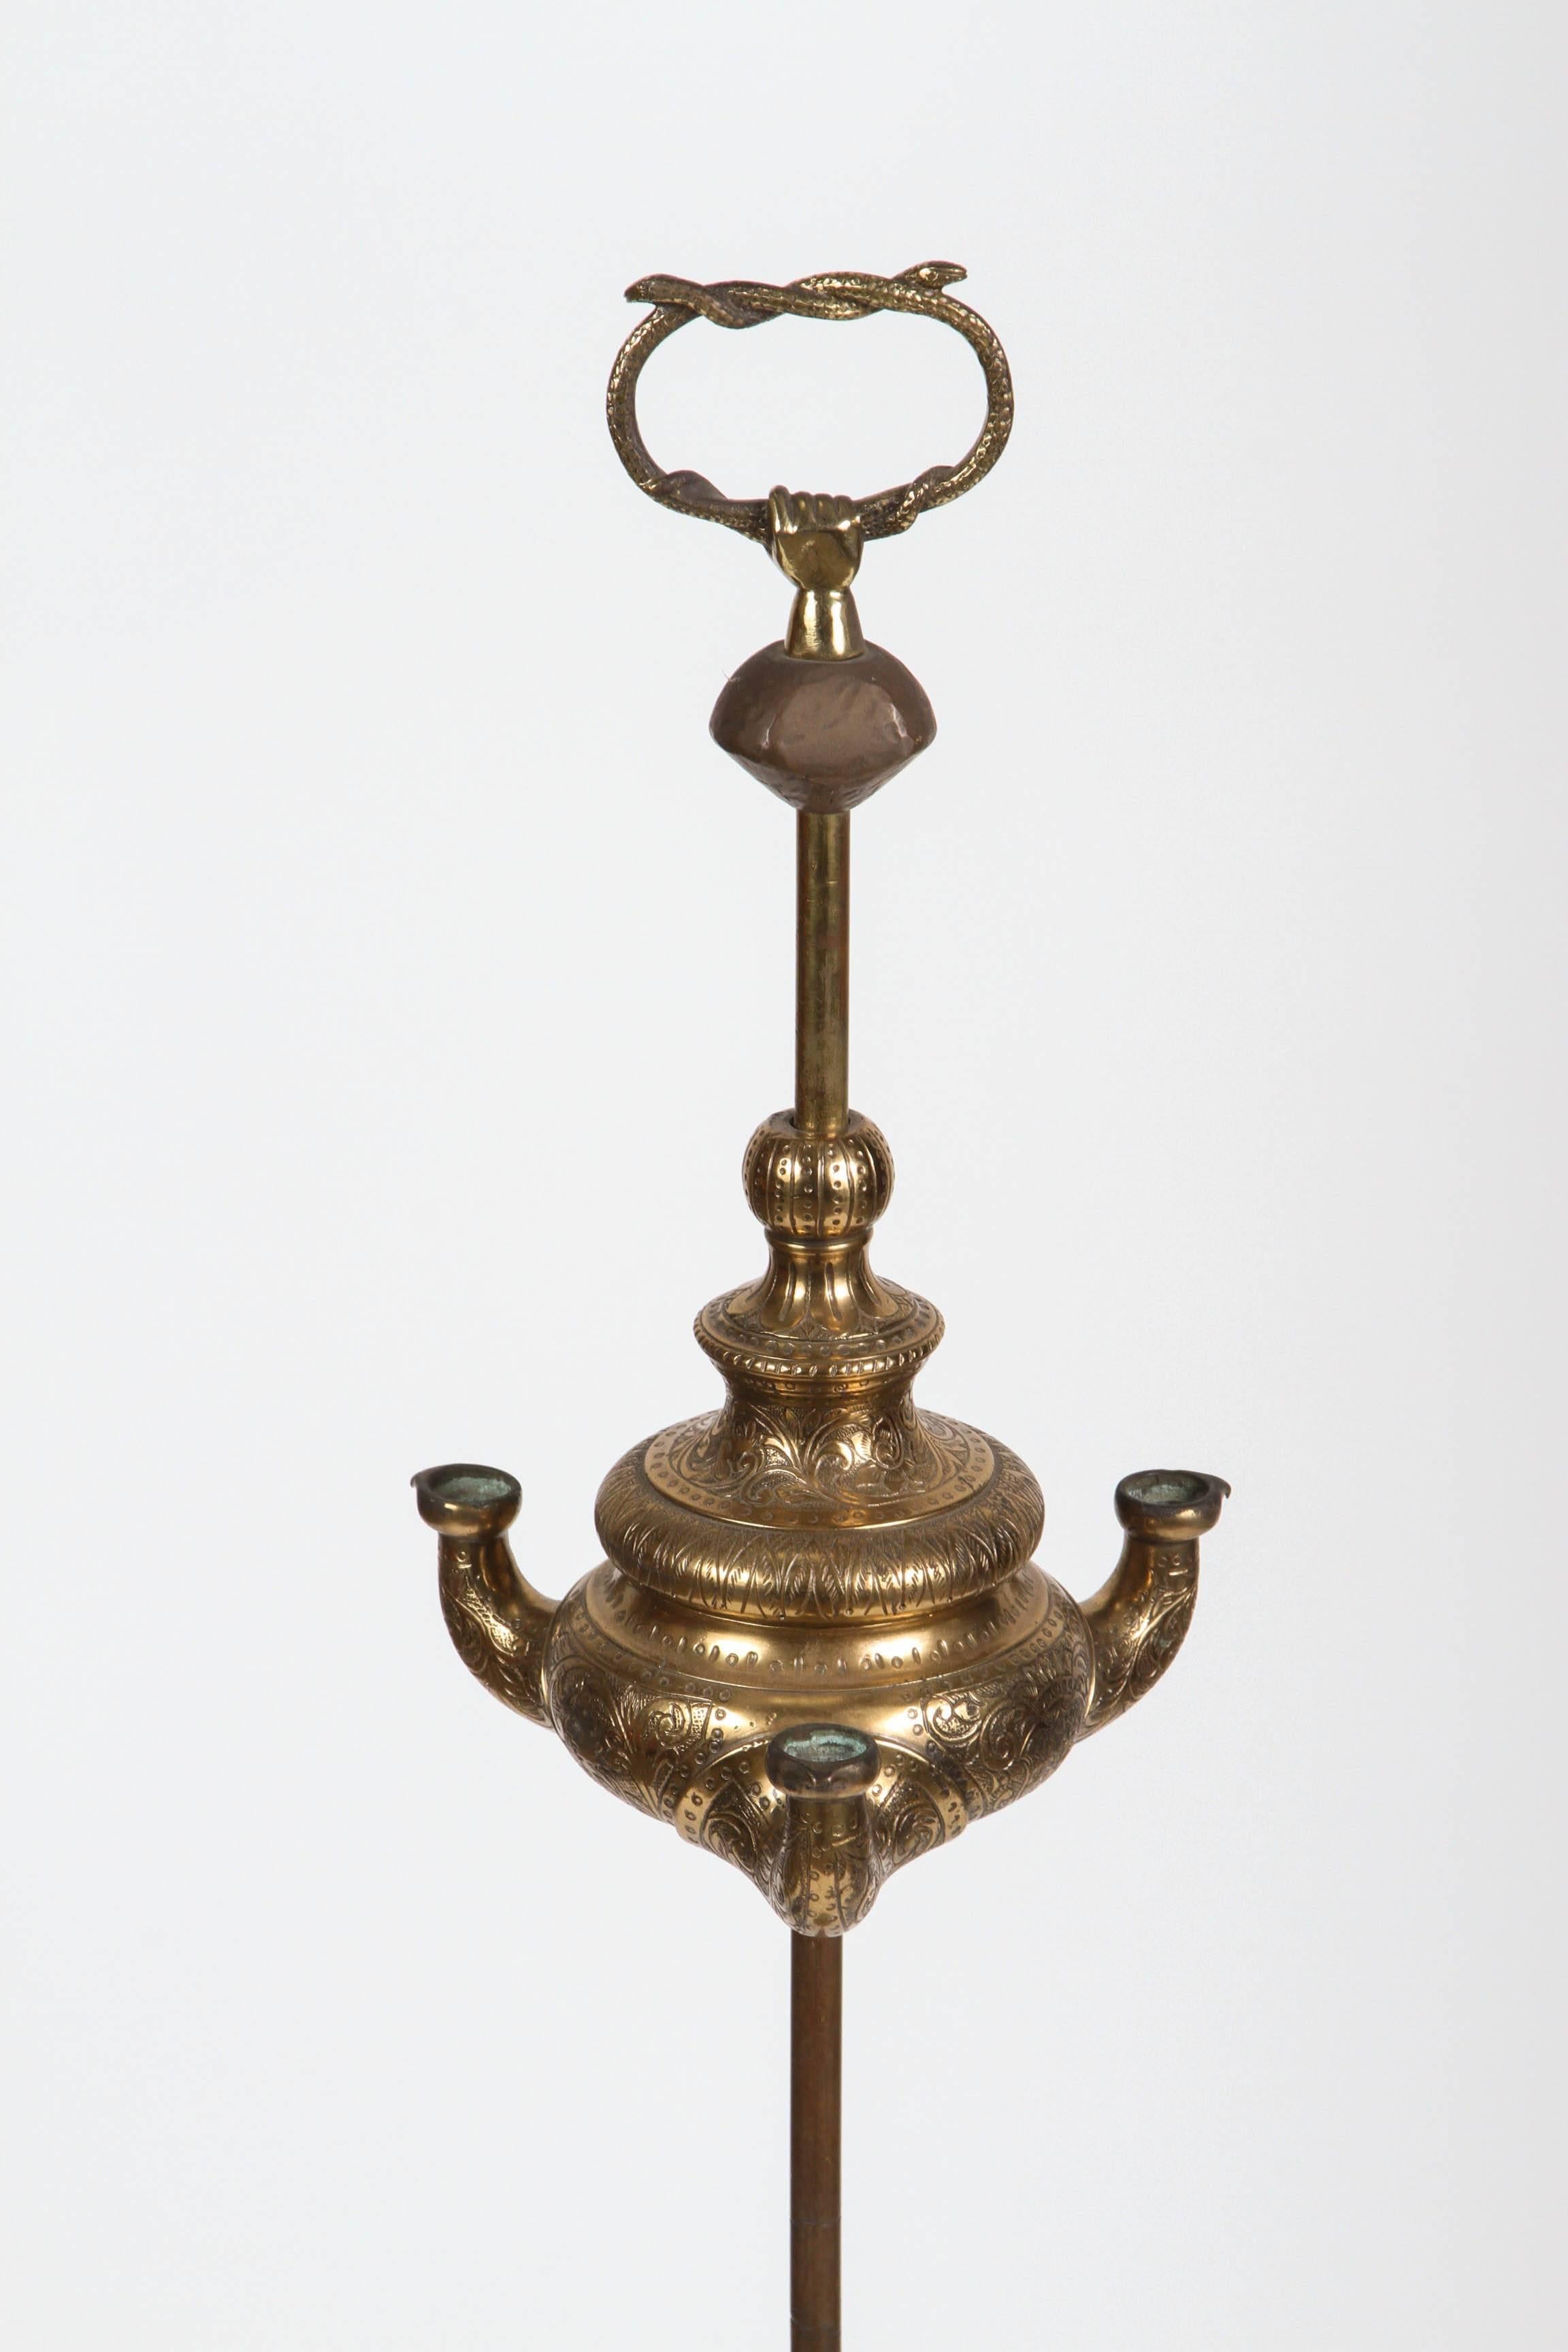 Anglo Raj antique 19th century bronze Indian temple oil lamp.
Whale oil lamp with 4 wick burners.
Fantastic patina and great scale.
Used for sacred ceremonies in temples.
The top show a hand holding 2 snakes.
The brass base is heavily carved with